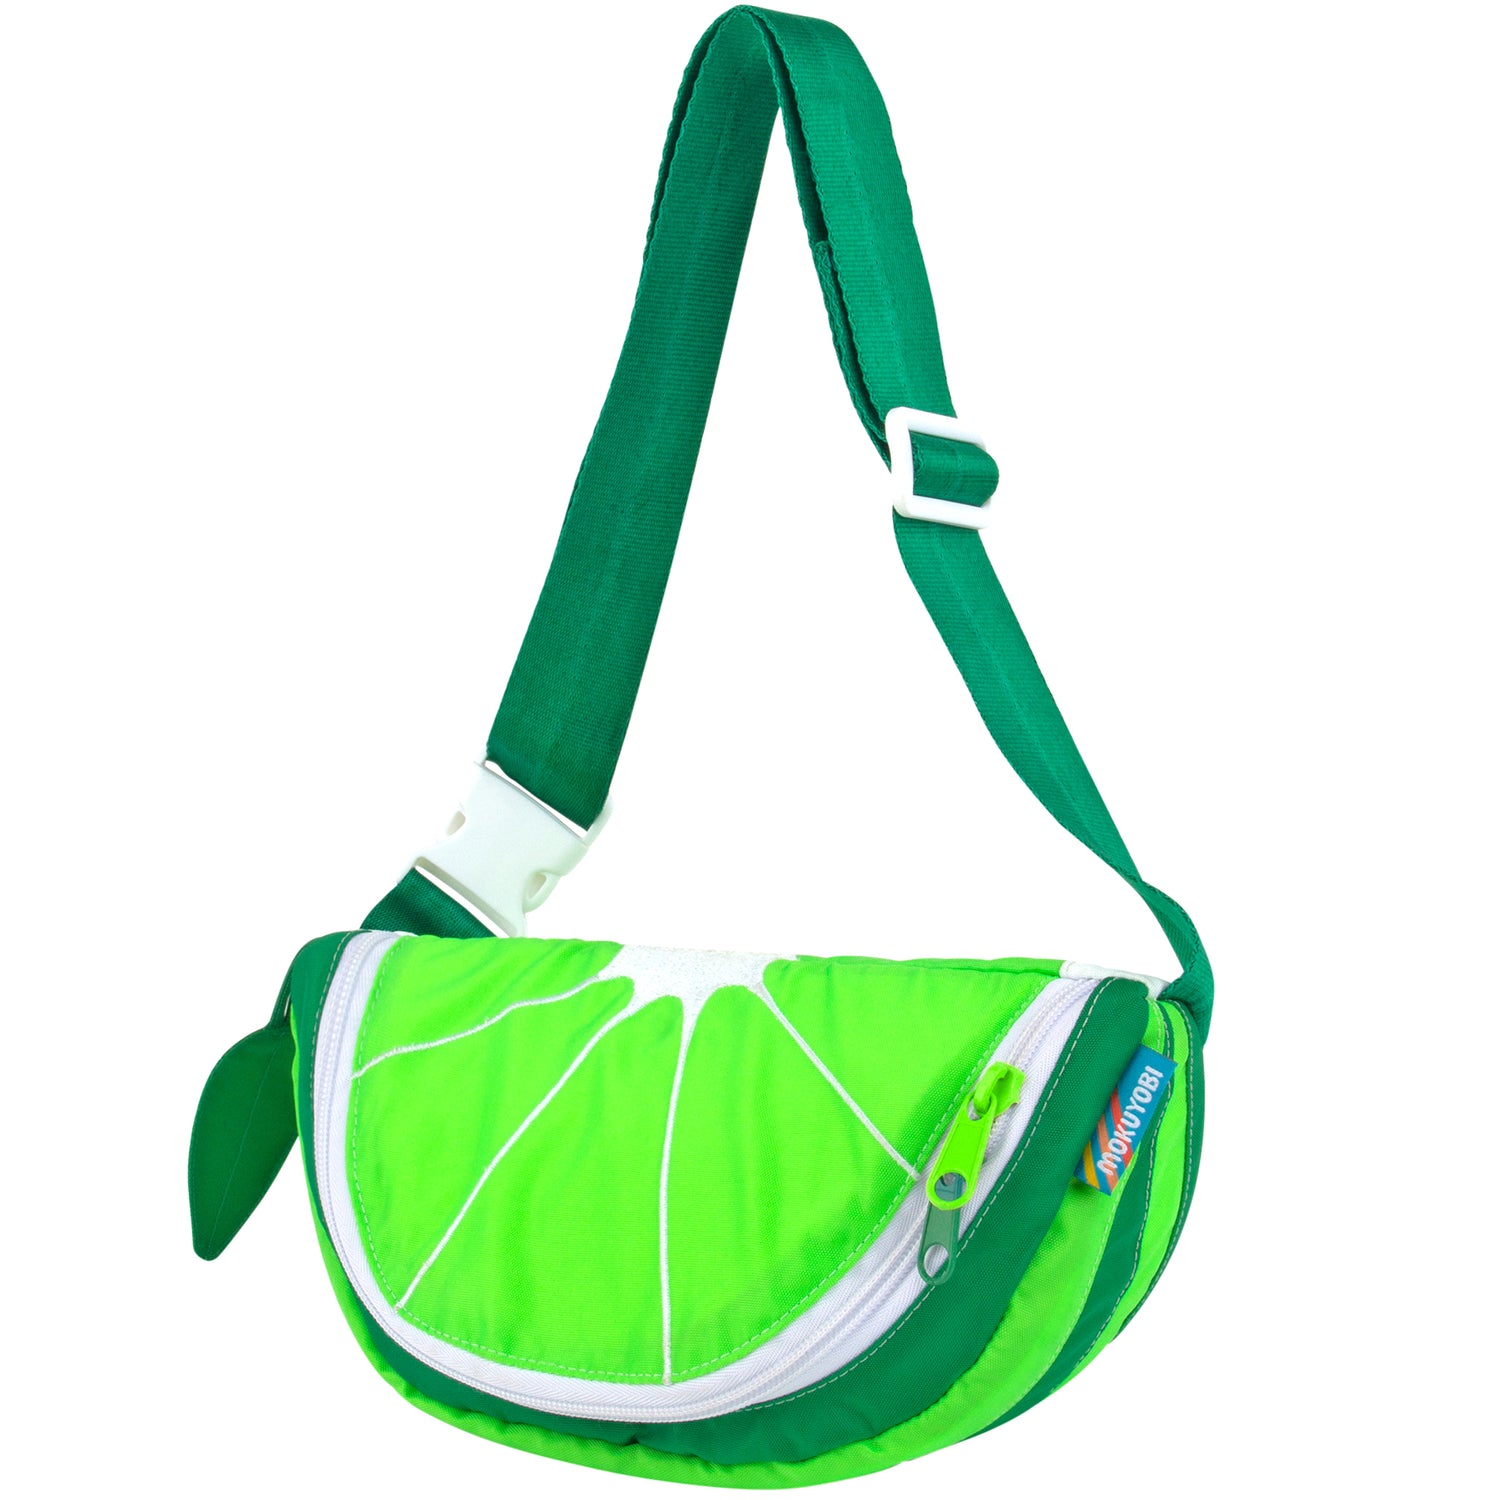 Lime fruit design fanny pack sling in various colors.